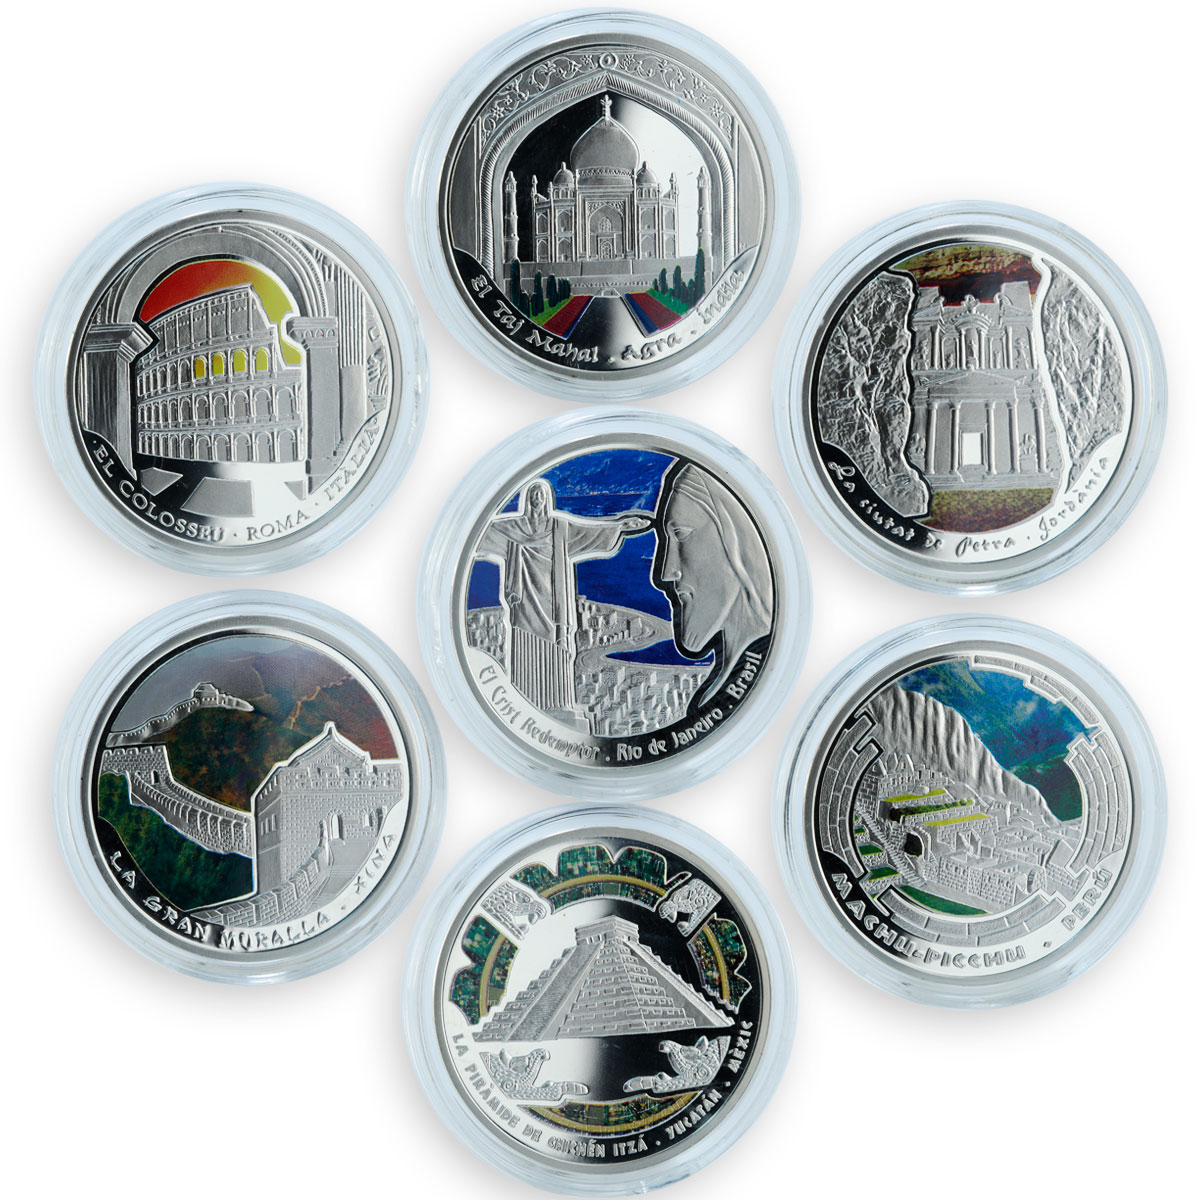 Andorra set of 7 coins 10 dinars Wonders of World UNESCO colorized silver 2009